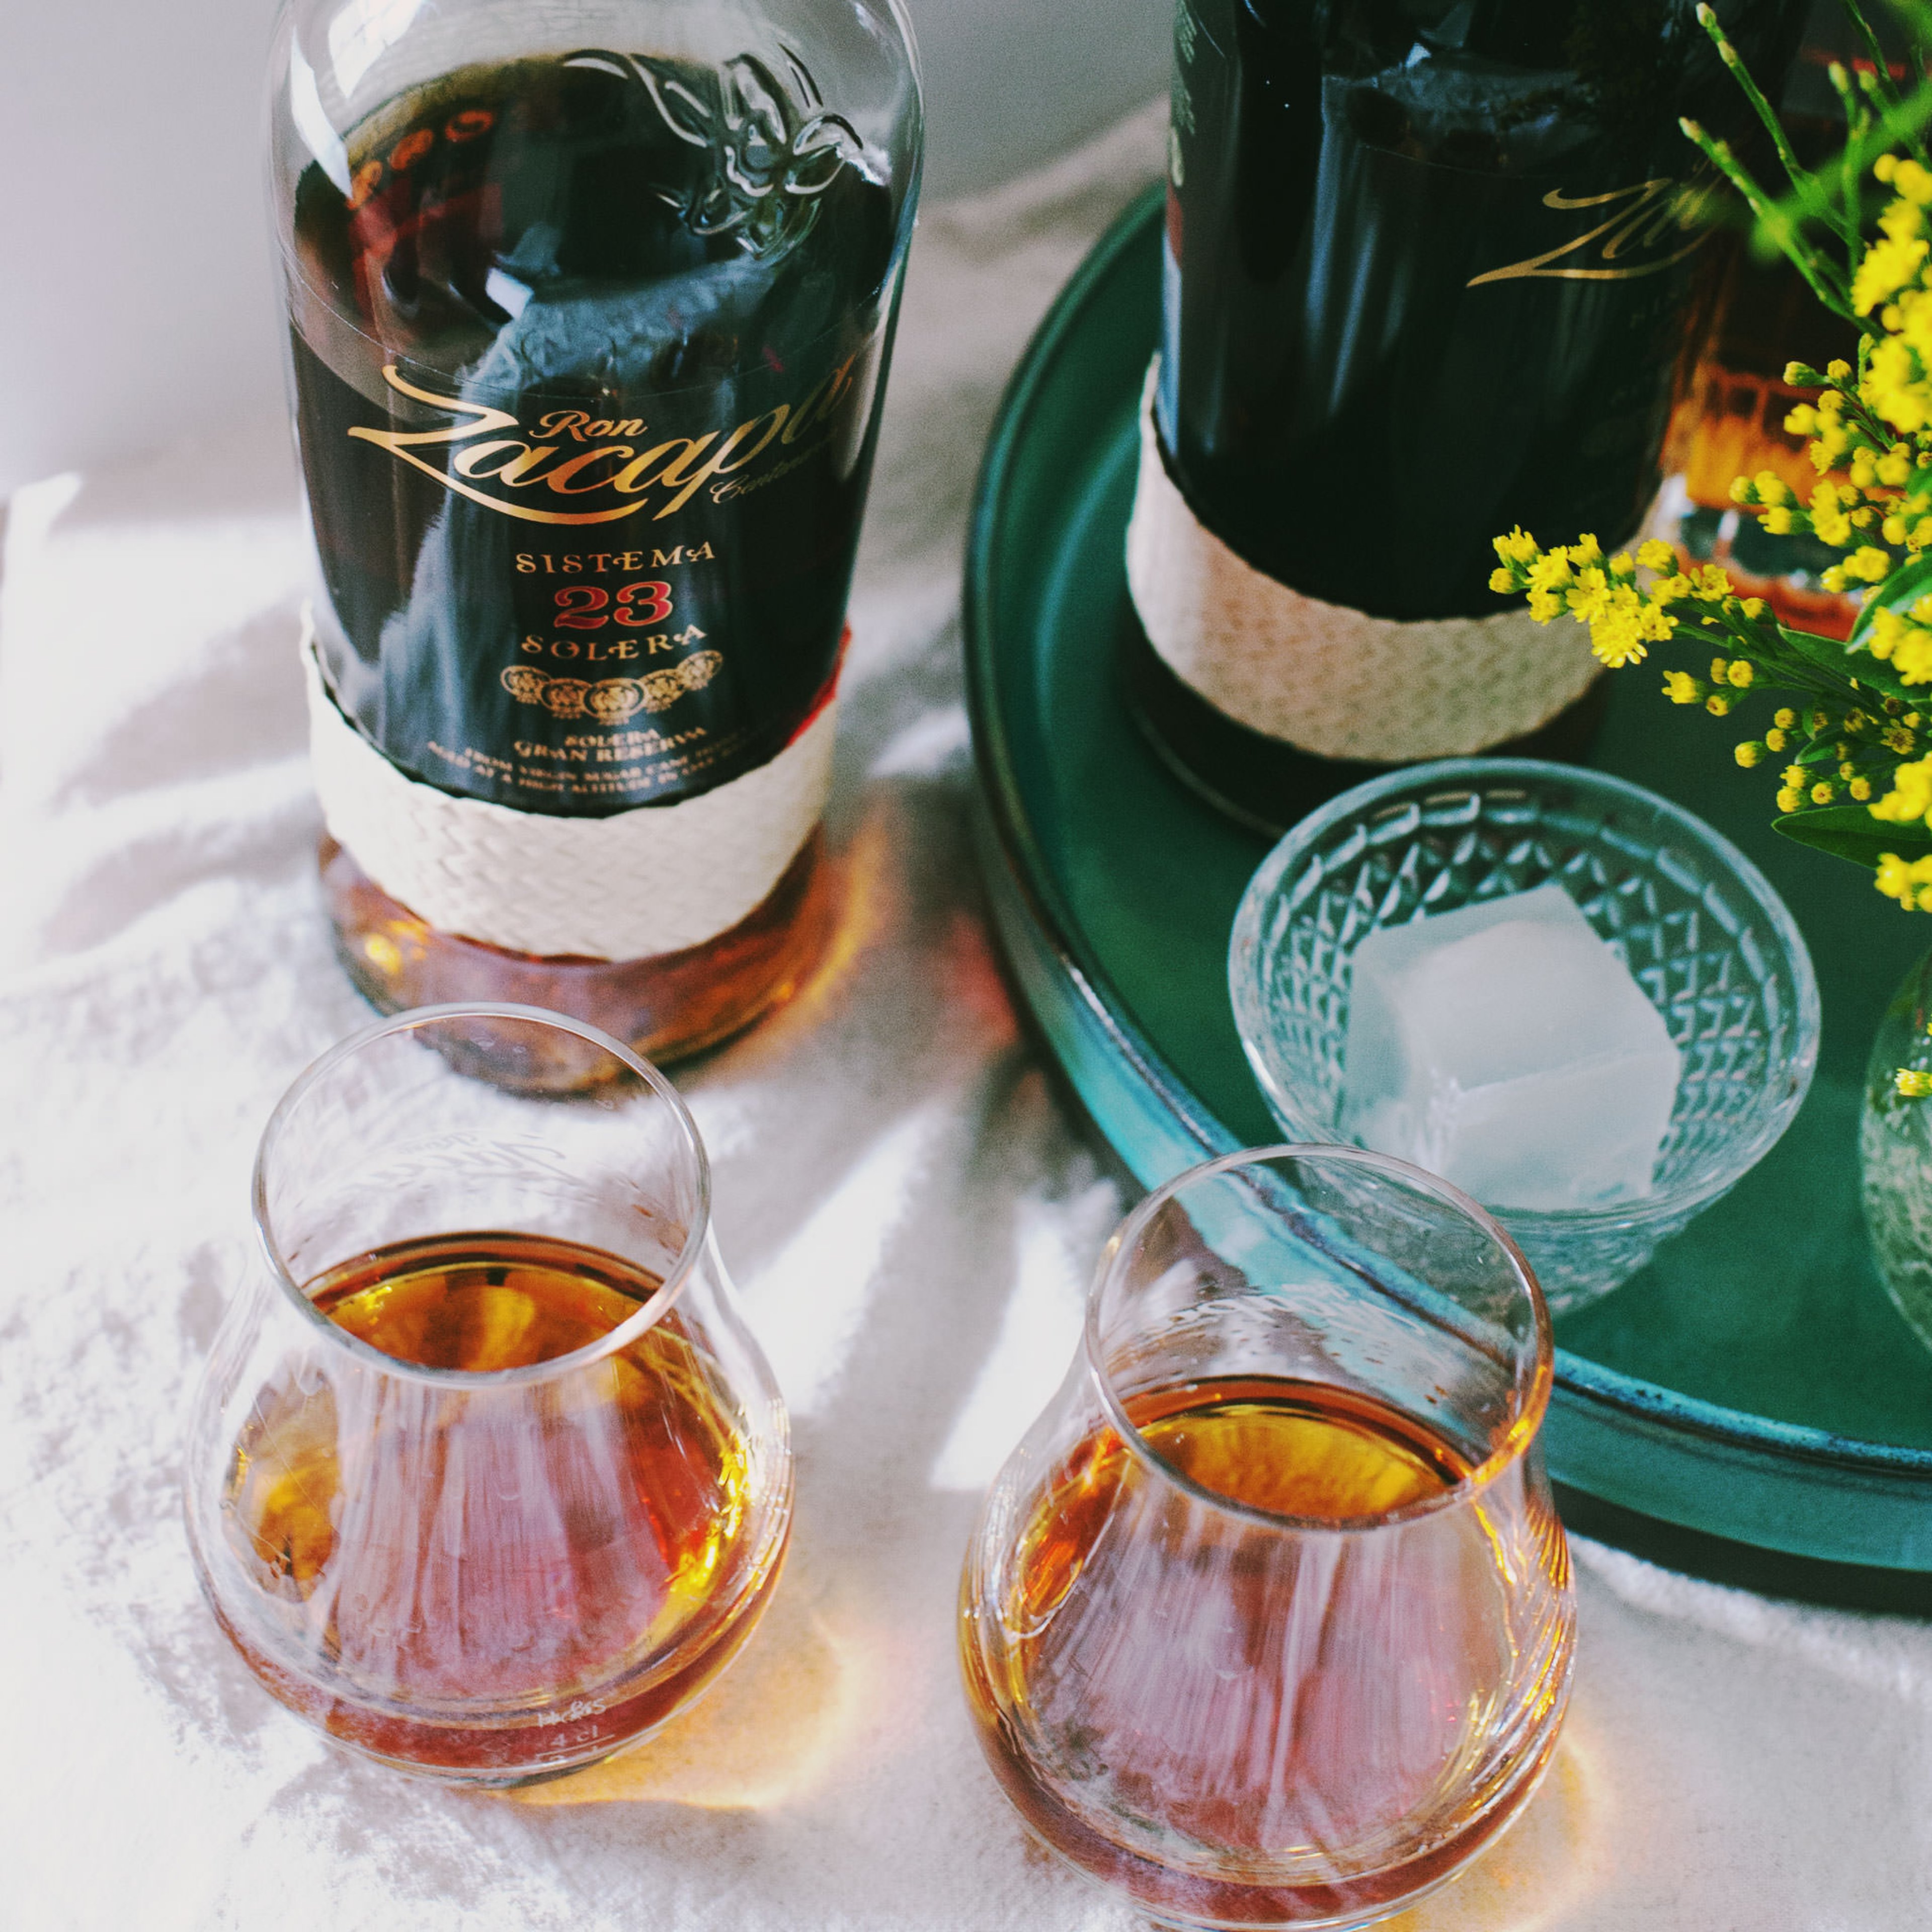 Discover Zacapa's The Art of Slow